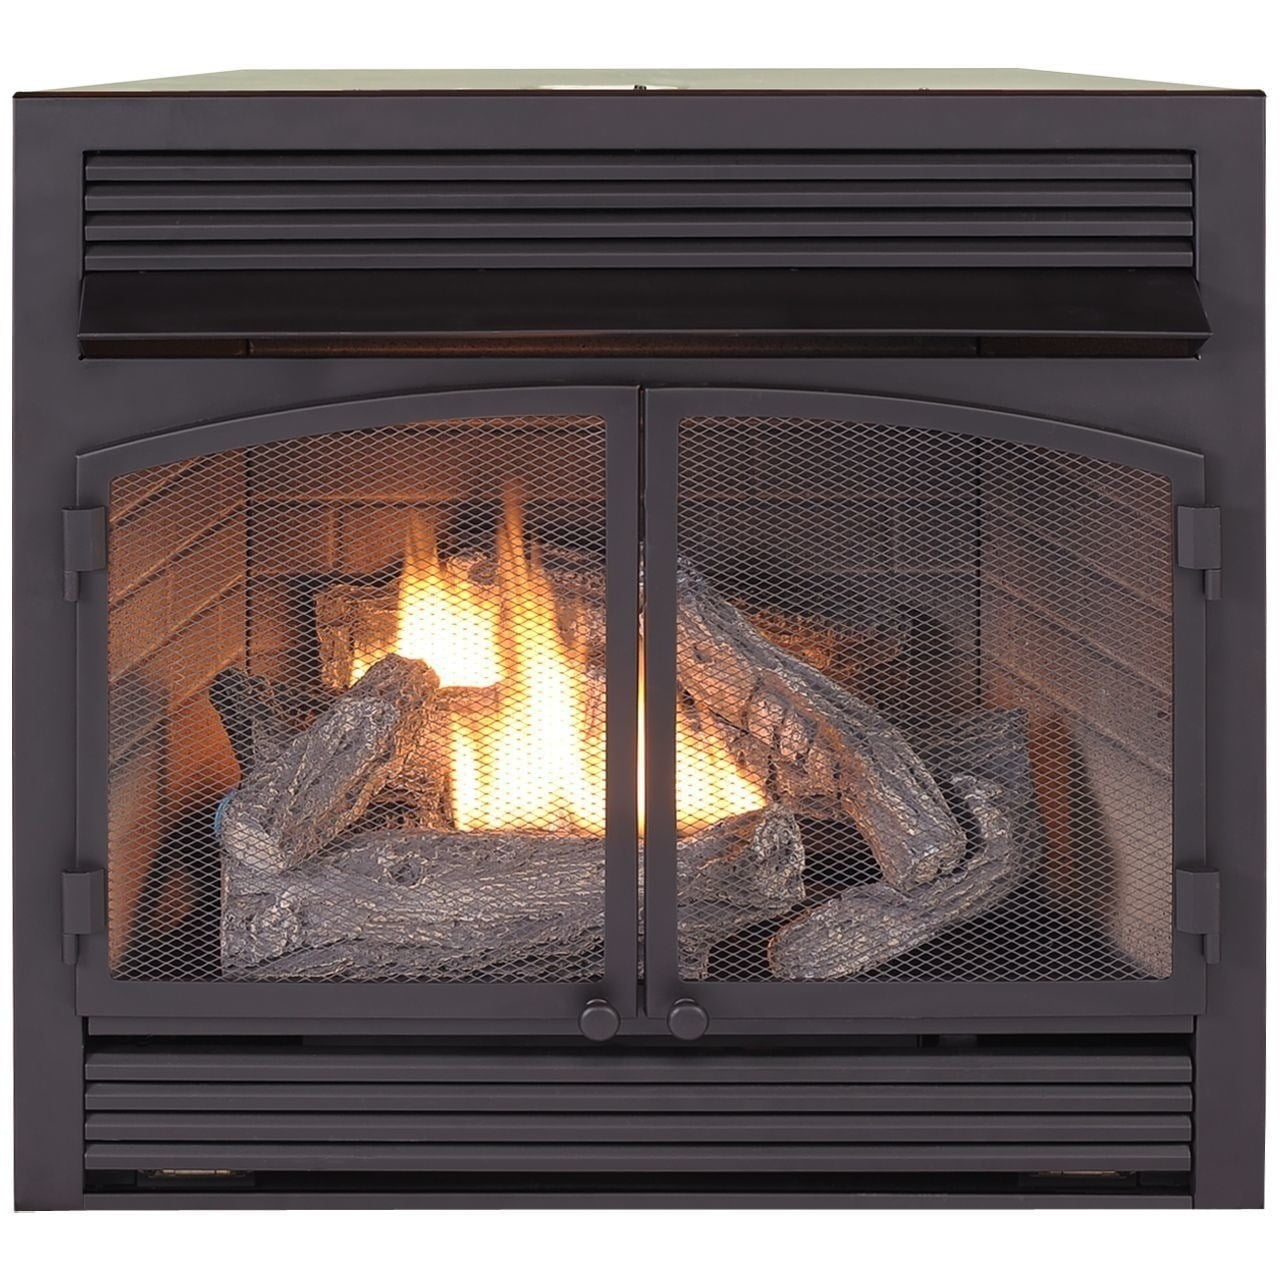 Duluth Forge Dual Fuel Ventless Gas, Duluth Forge Ventless Gas Fireplace Installation Instructions